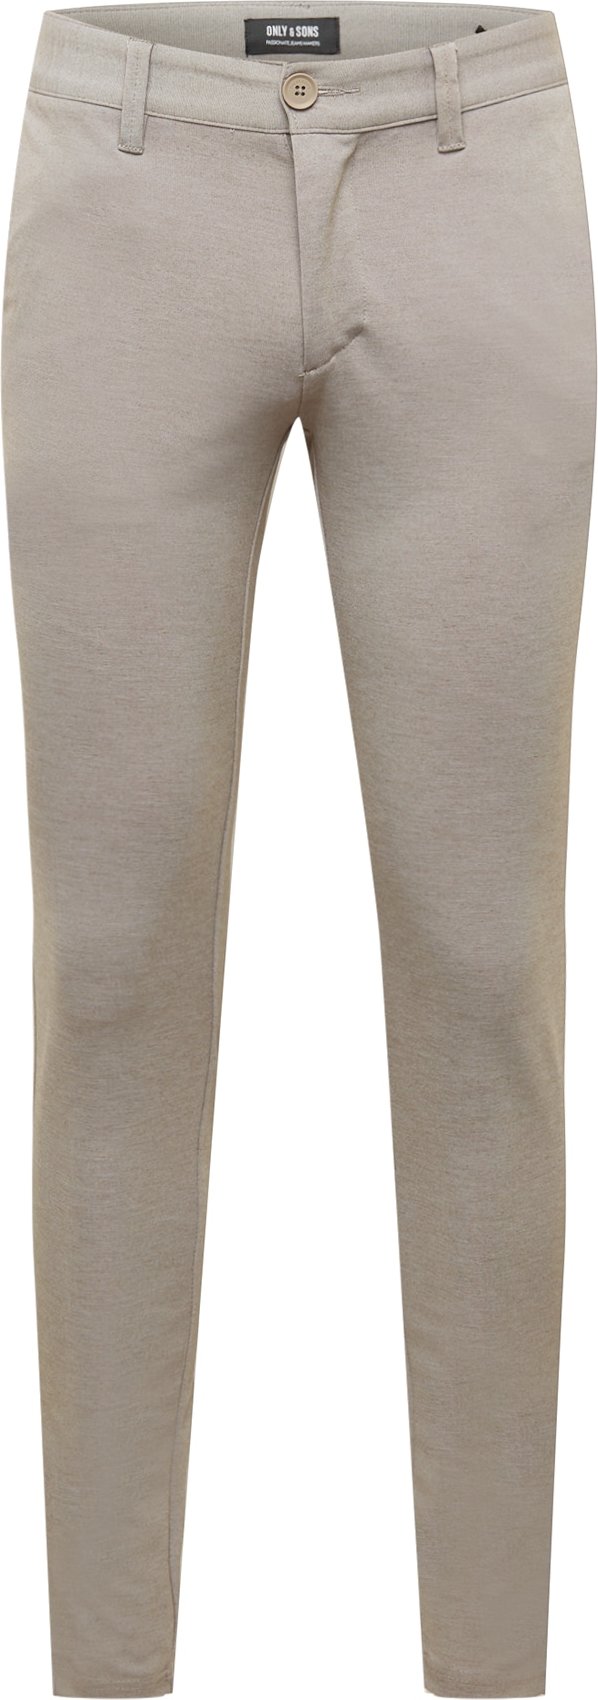 Only & Sons Chino kalhoty 'MARK' cappuccino